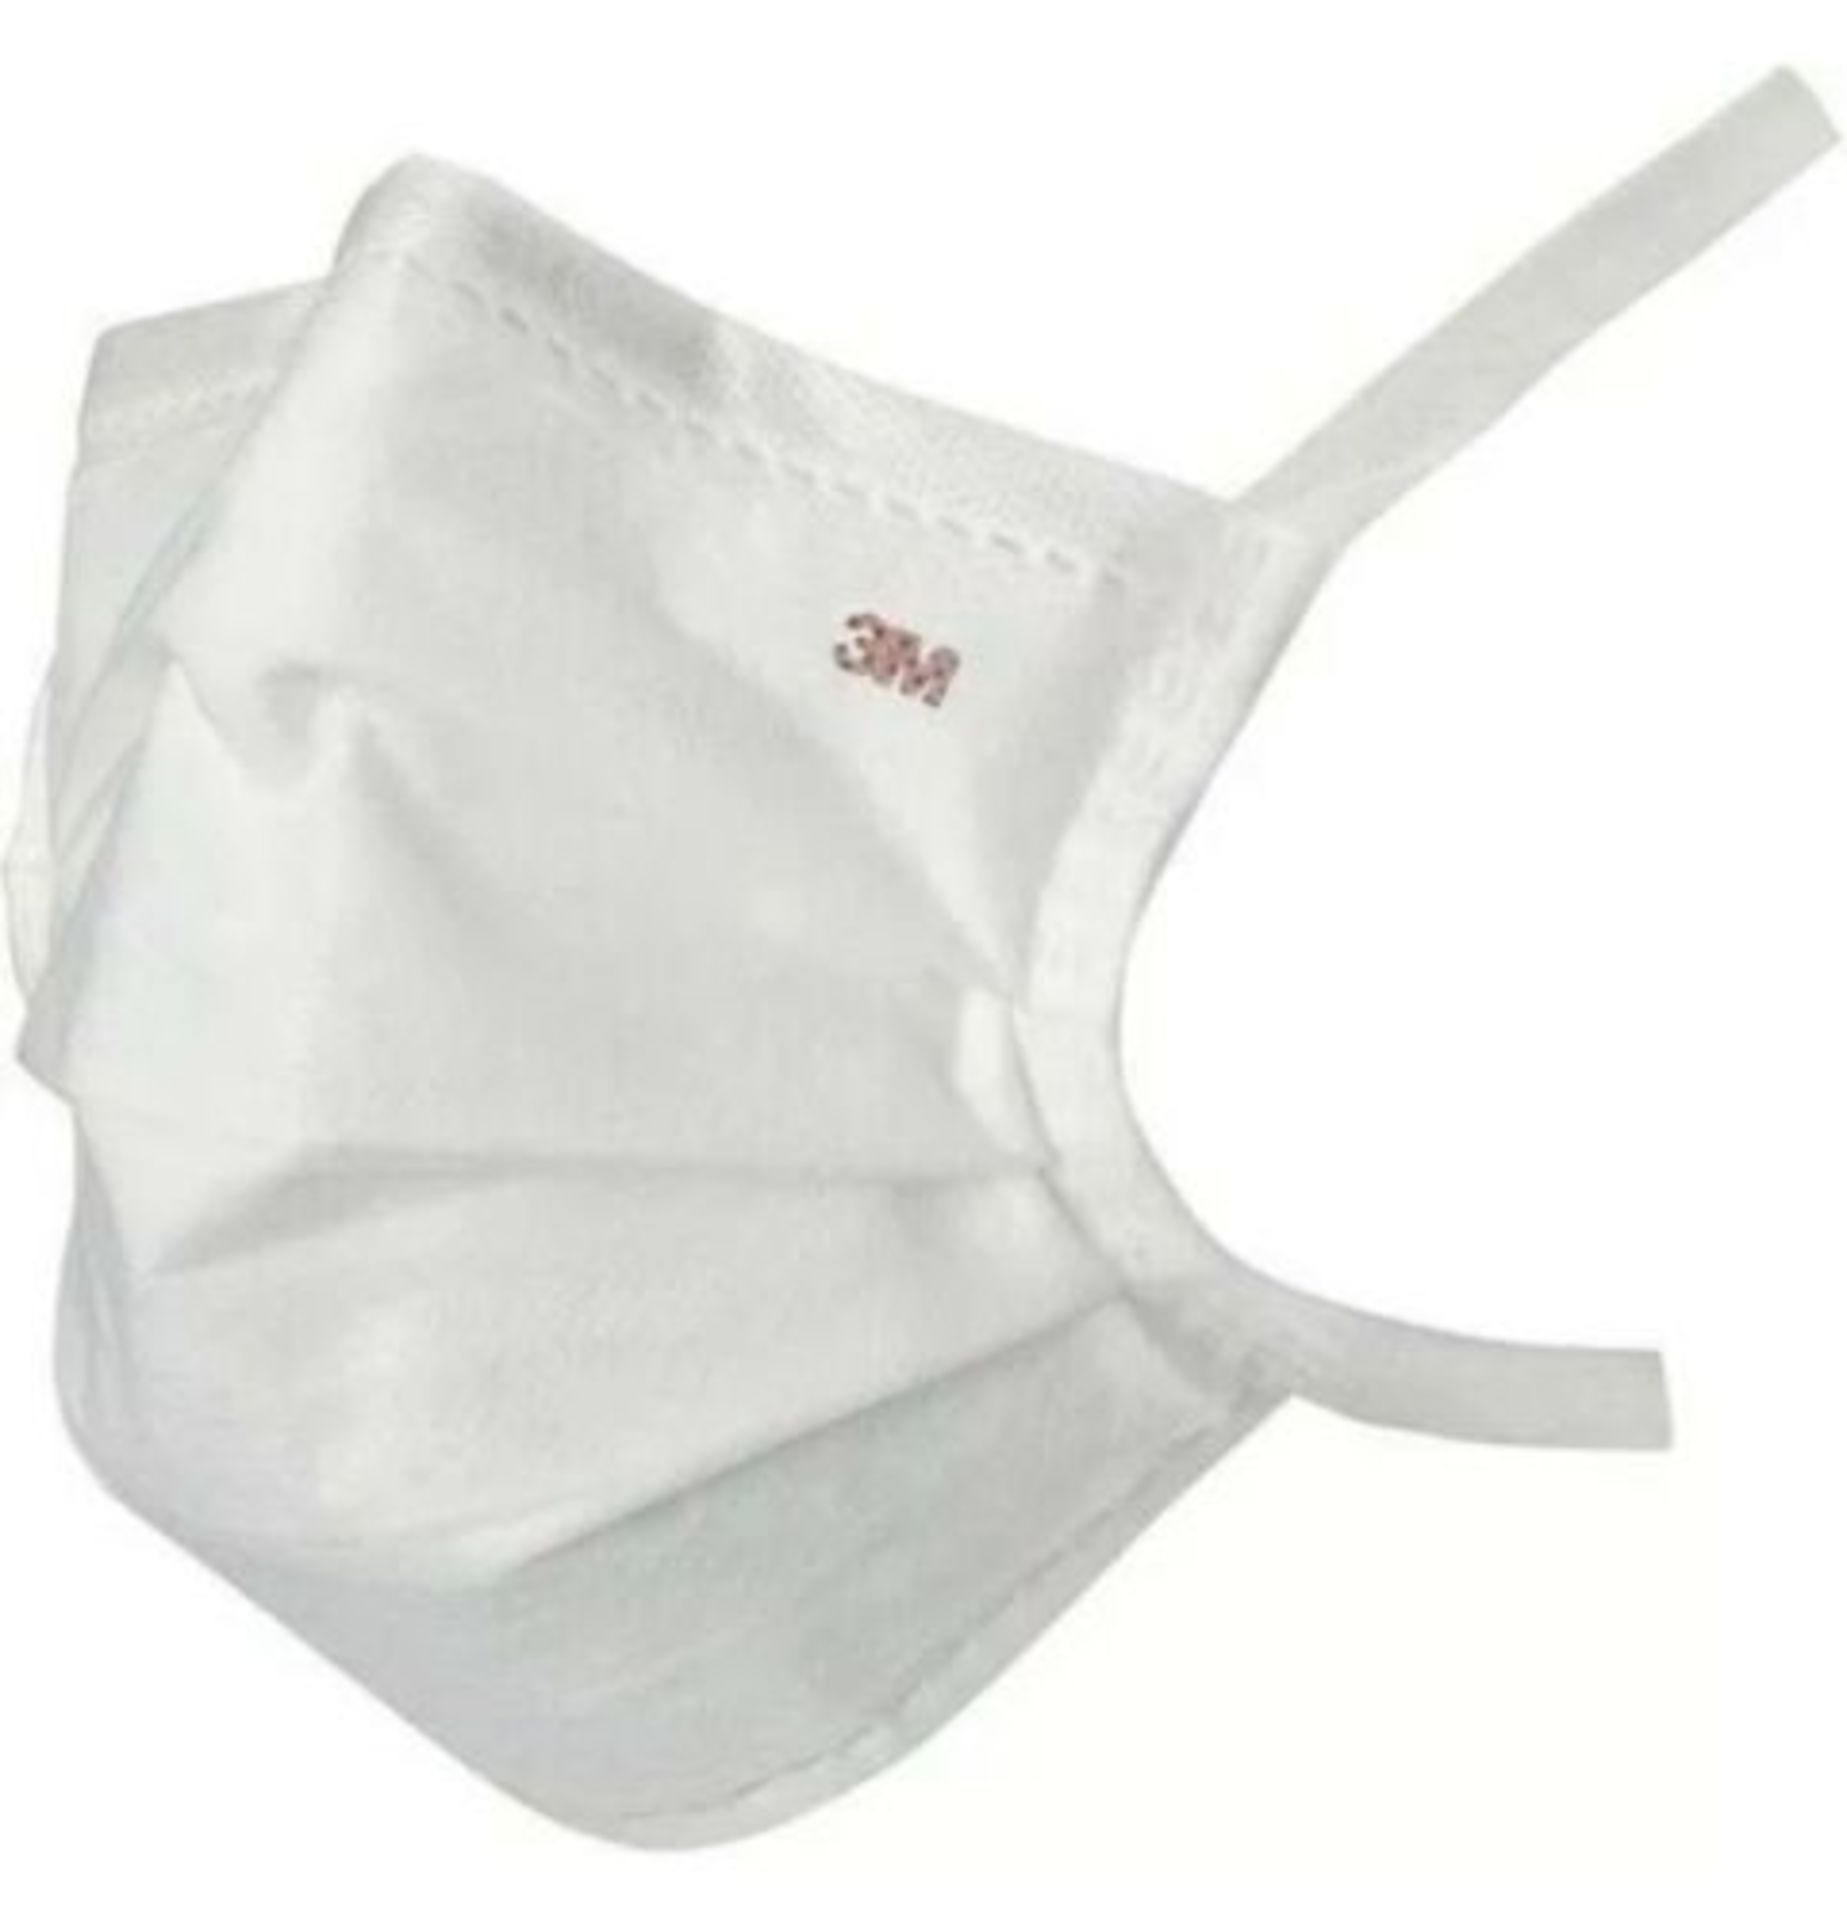 3M 1819 4PLY SURGICAL TIE-ON FACE MASK (80 Masks Per Box)